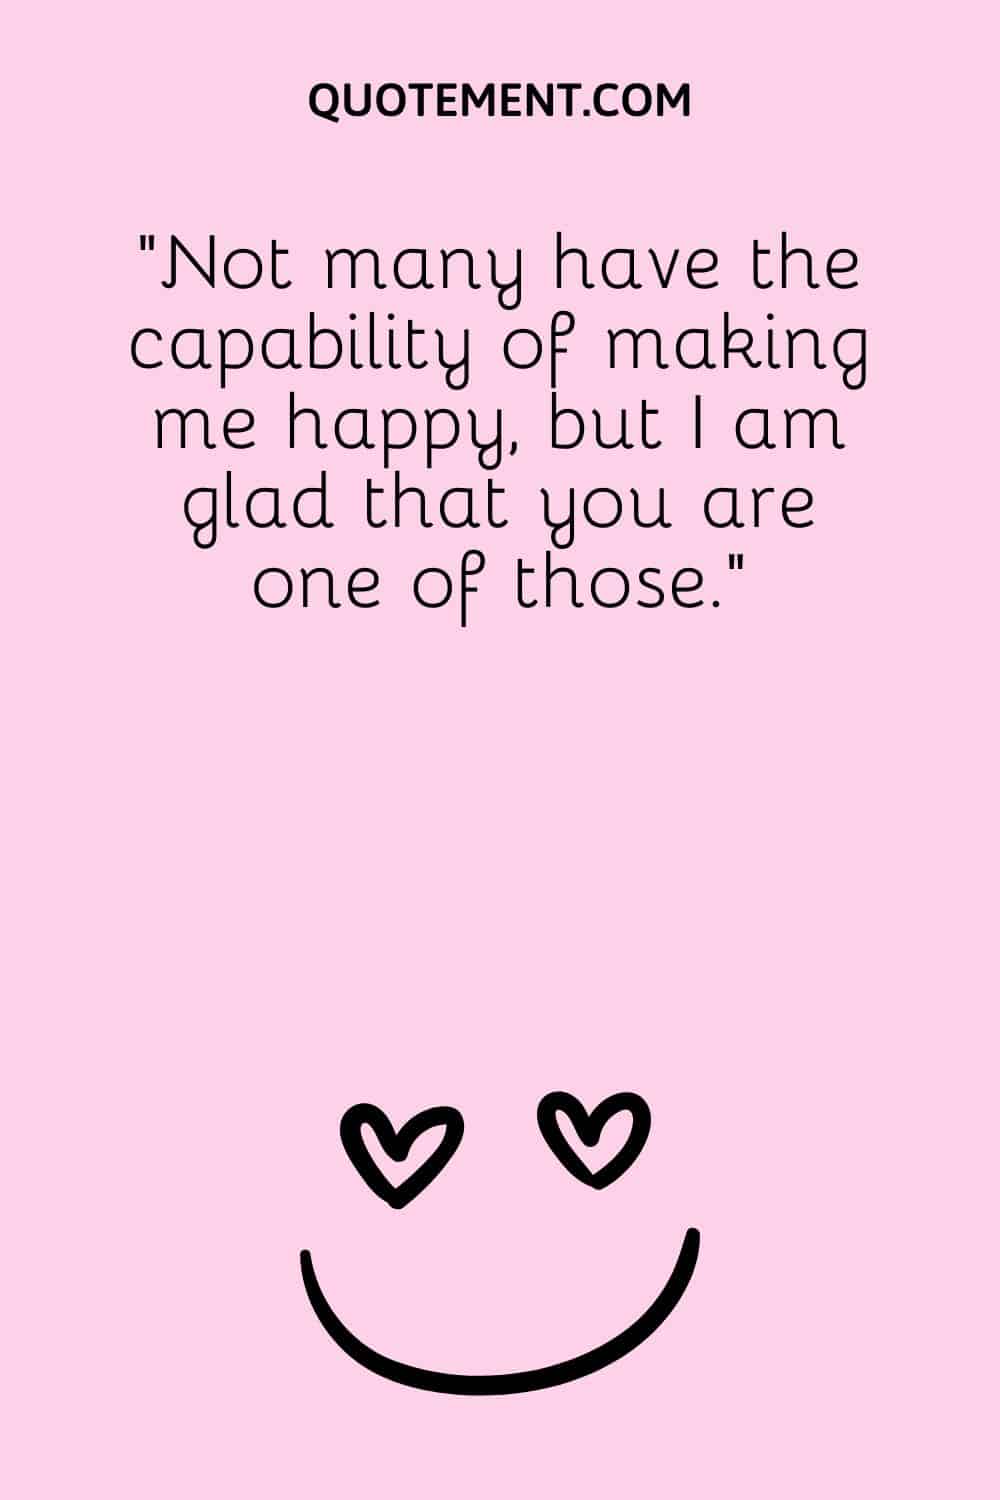 Not many have the capability of making me happy